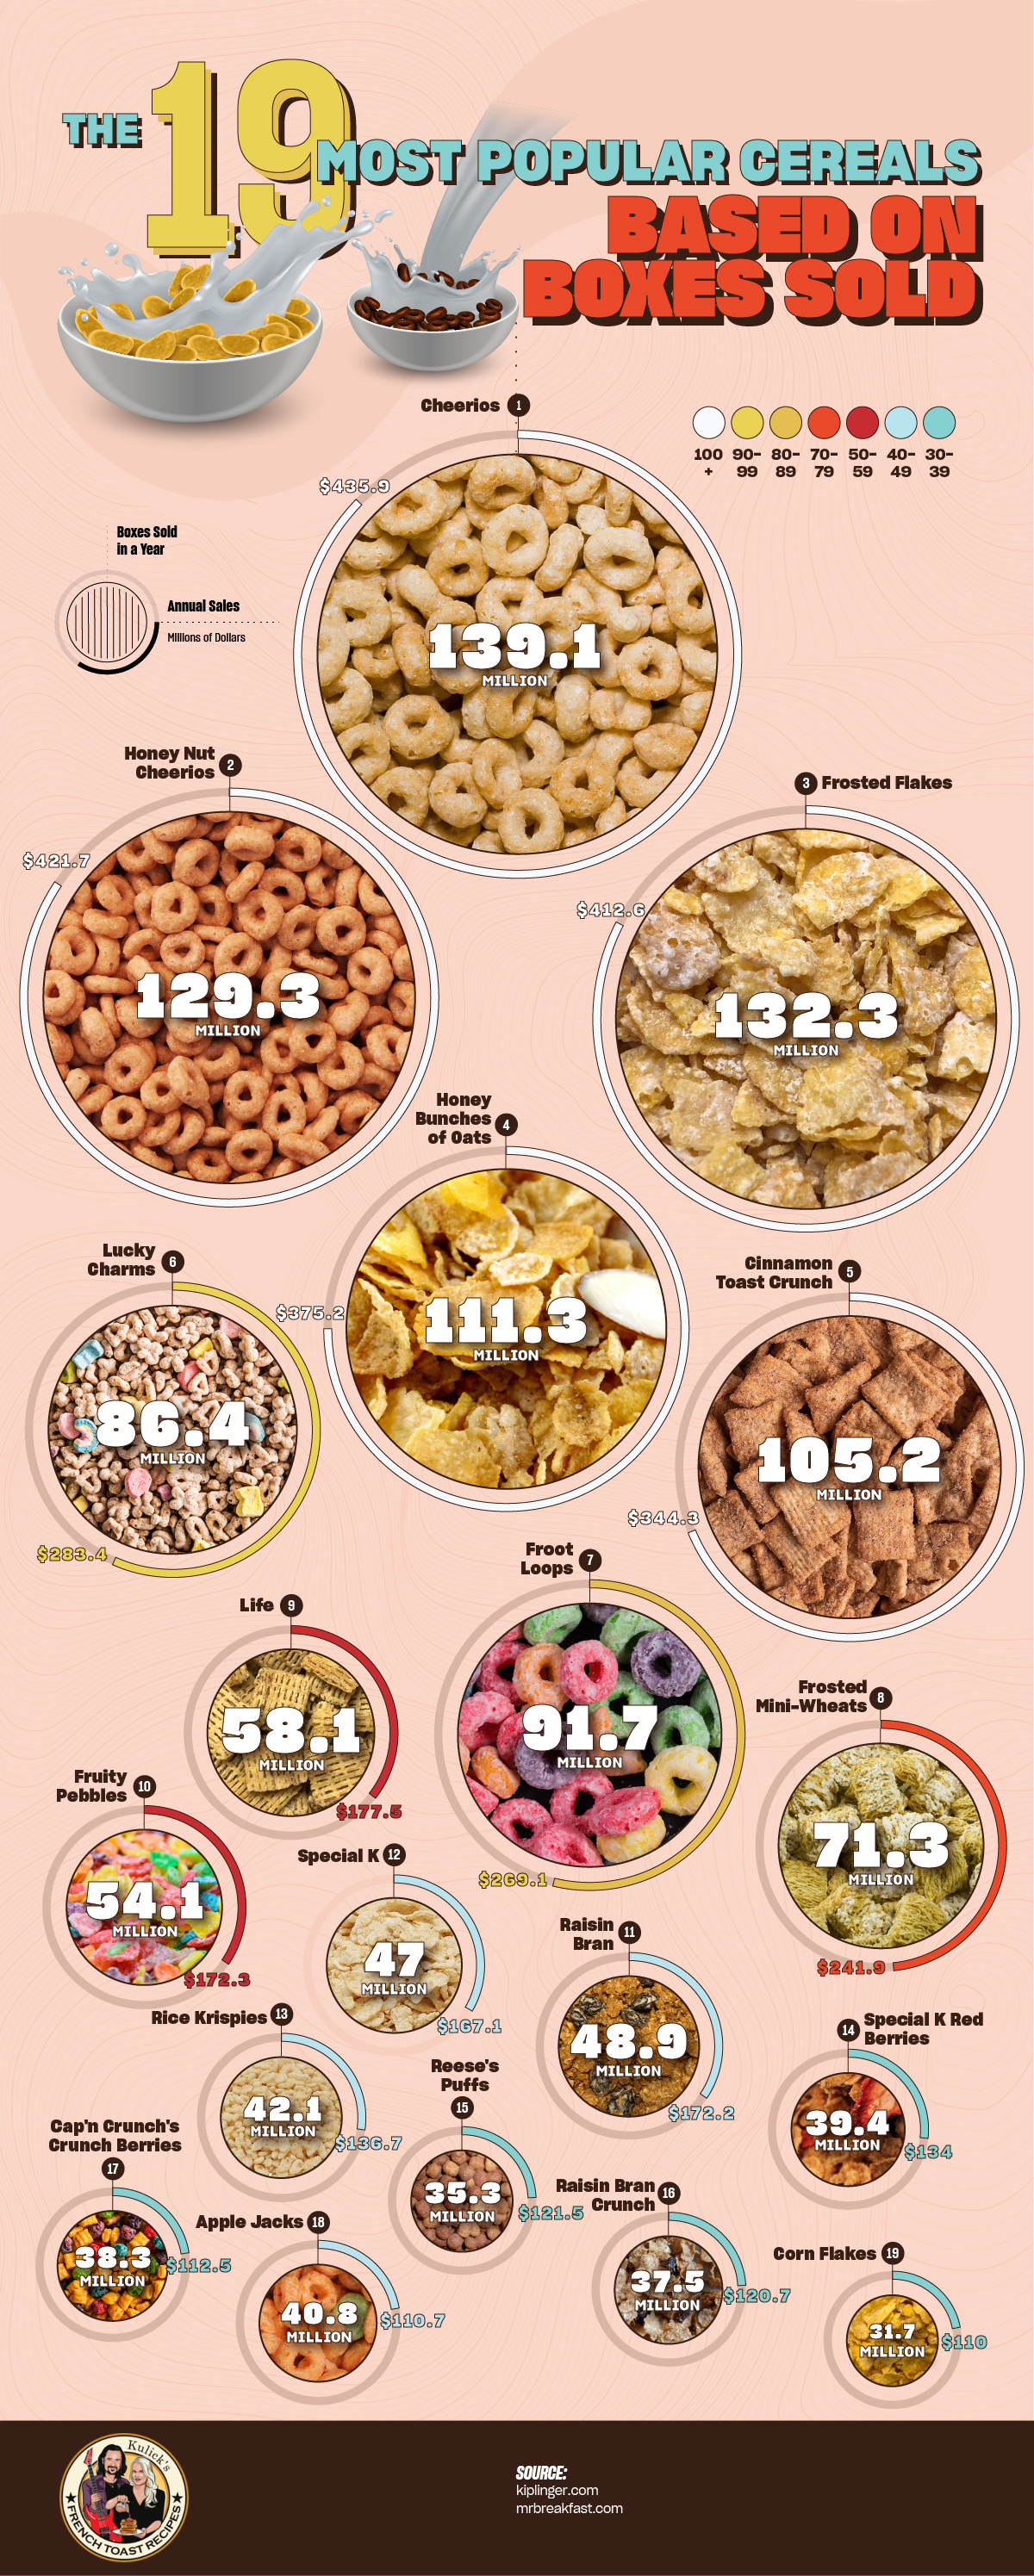 The 19 Most Popular Cereals Based on Boxes Sold